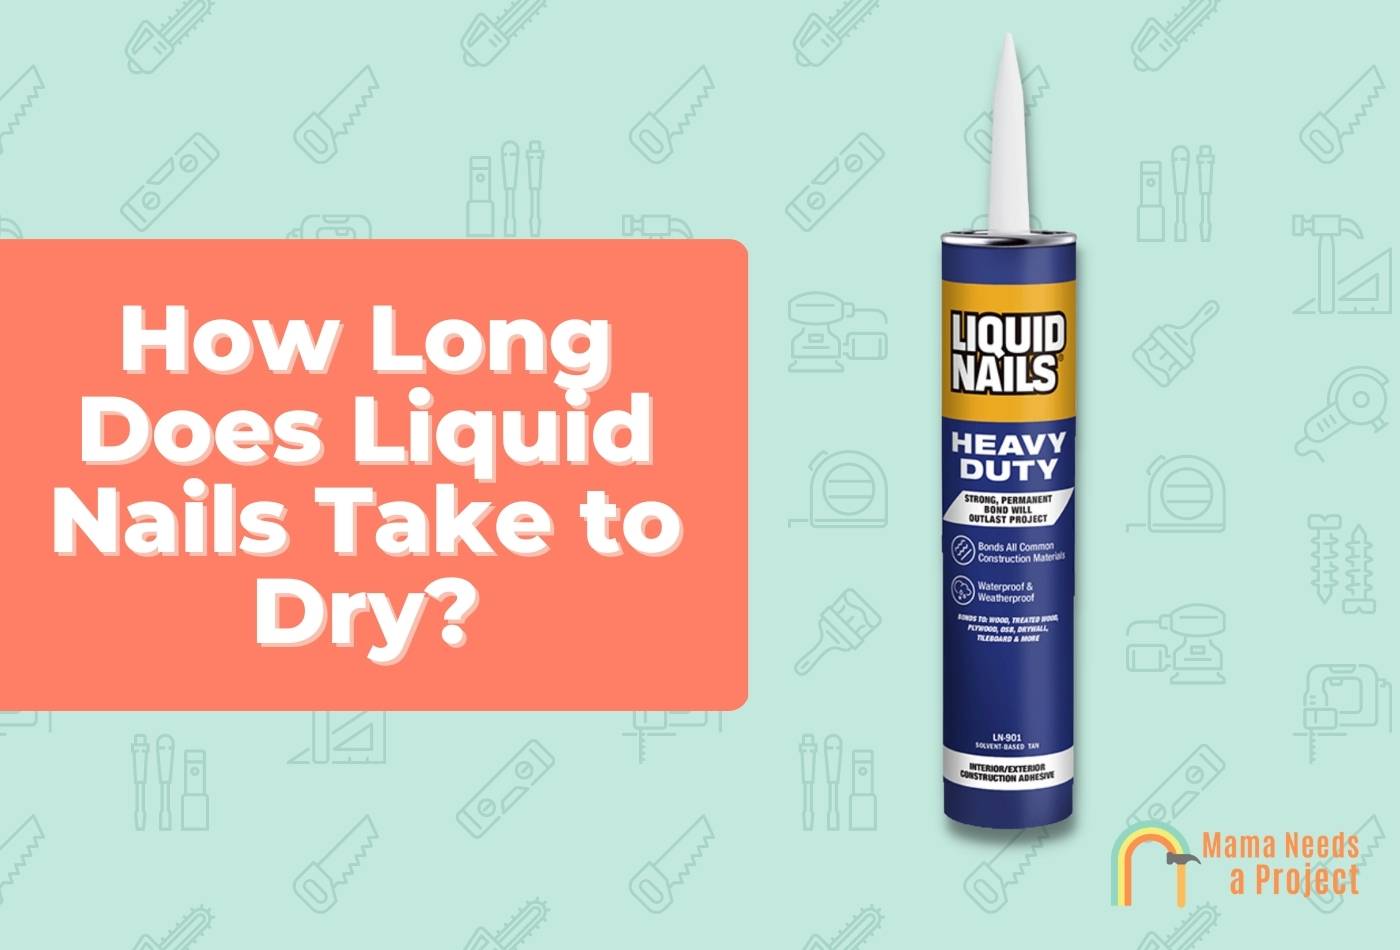 How Long Does Liquid Nails Take to Dry